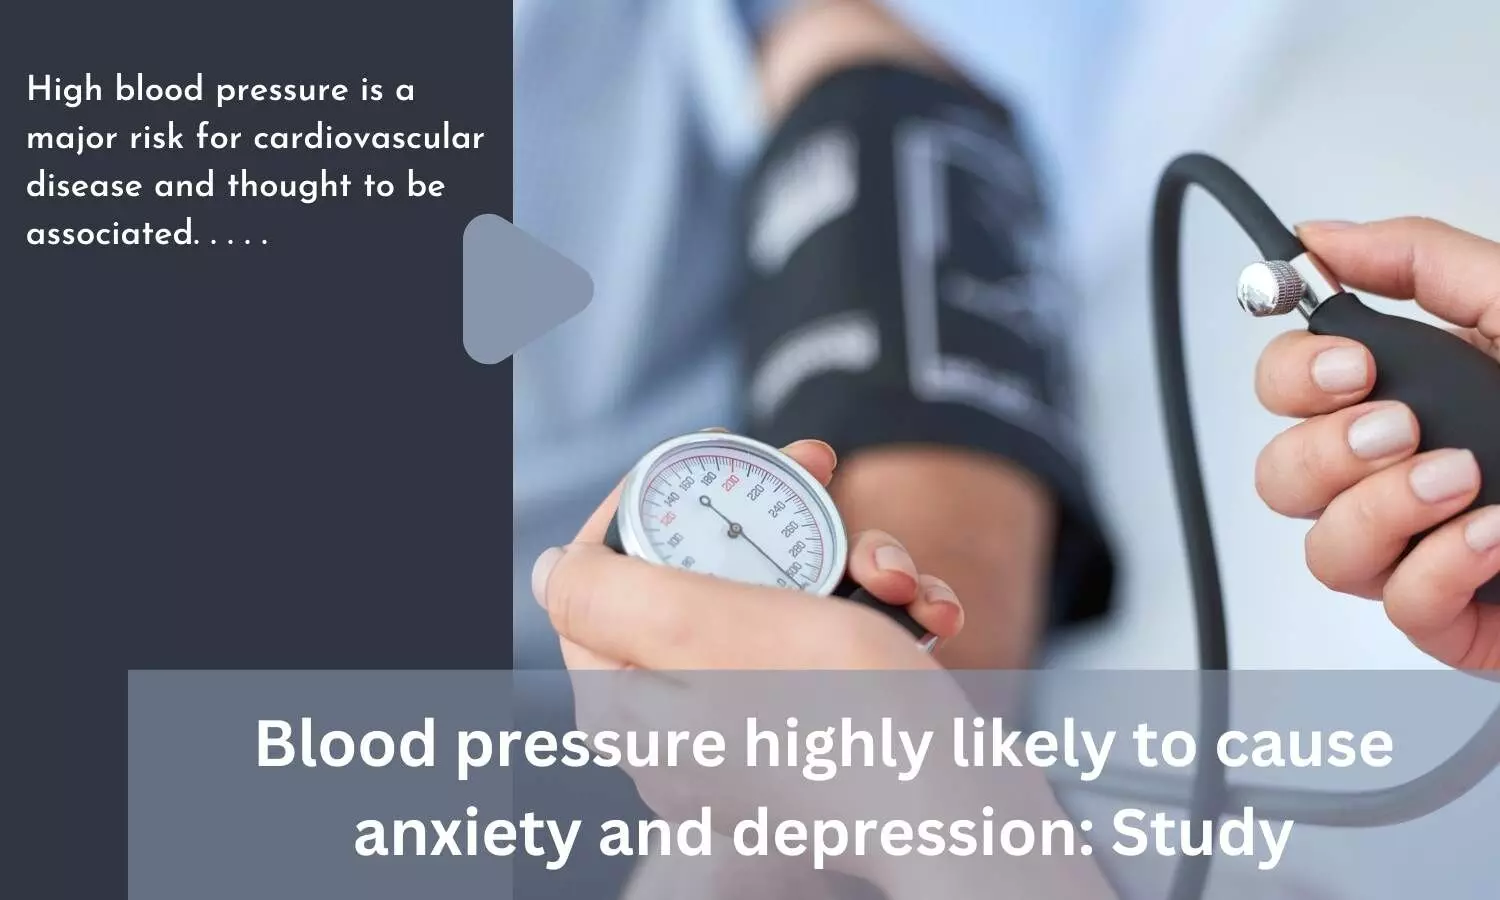 Blood pressure highly likely to cause anxiety and depression: Study